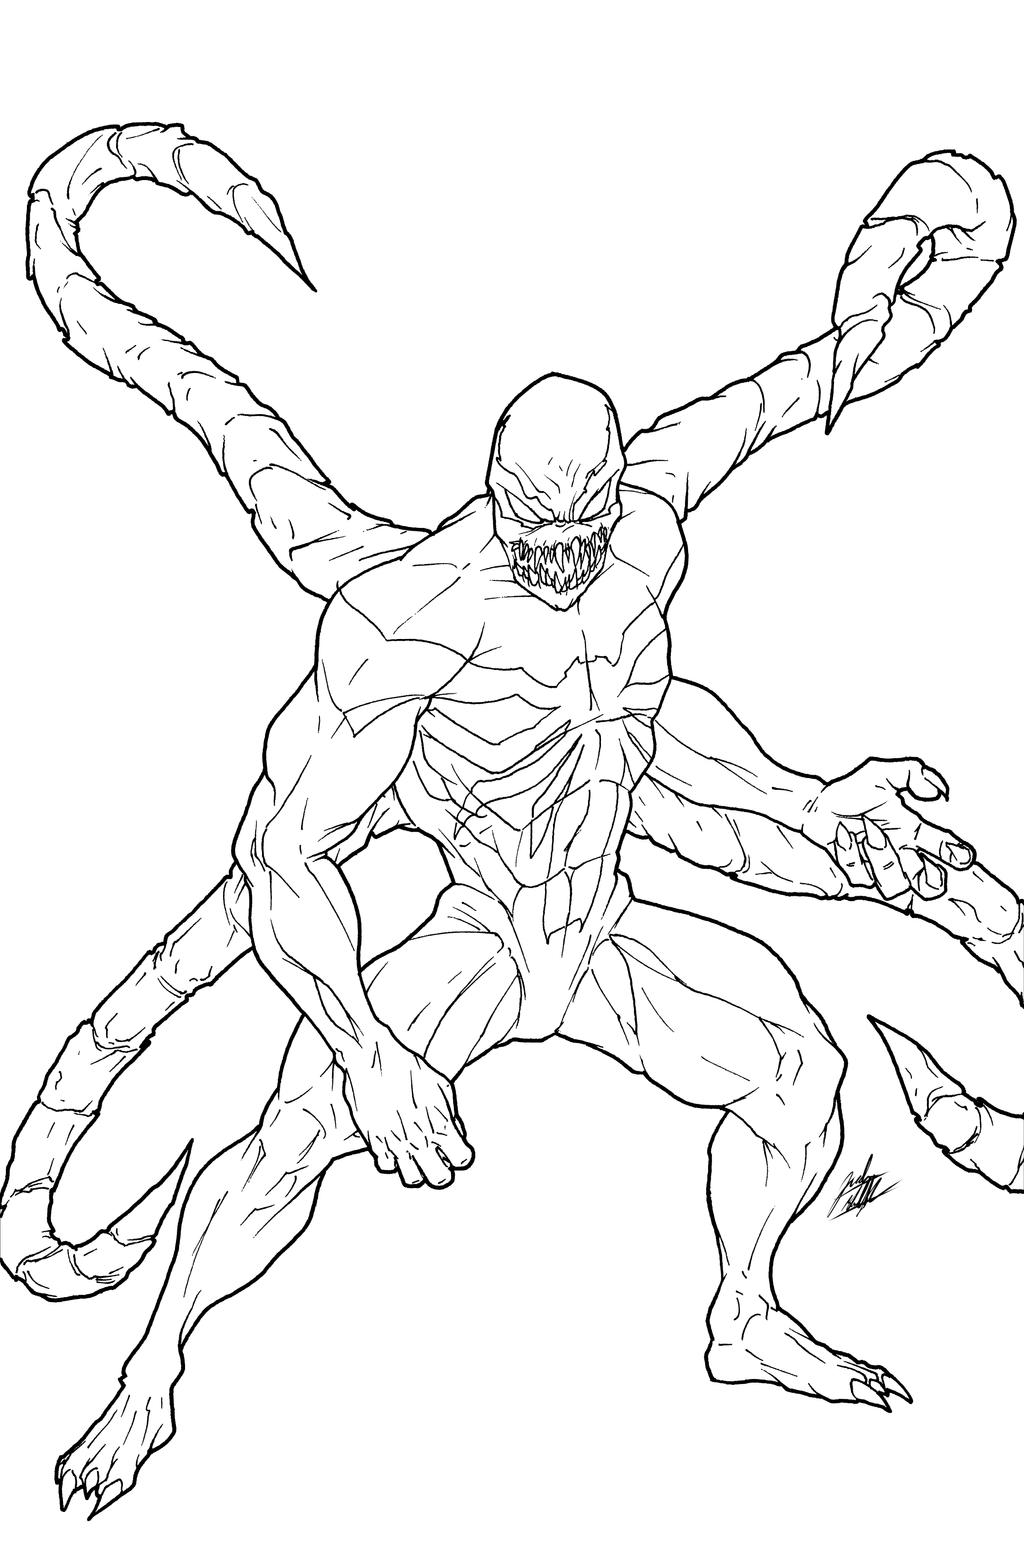 Printable Carnage Coloring Pages Pdf - Printable Carnage Coloring Pages